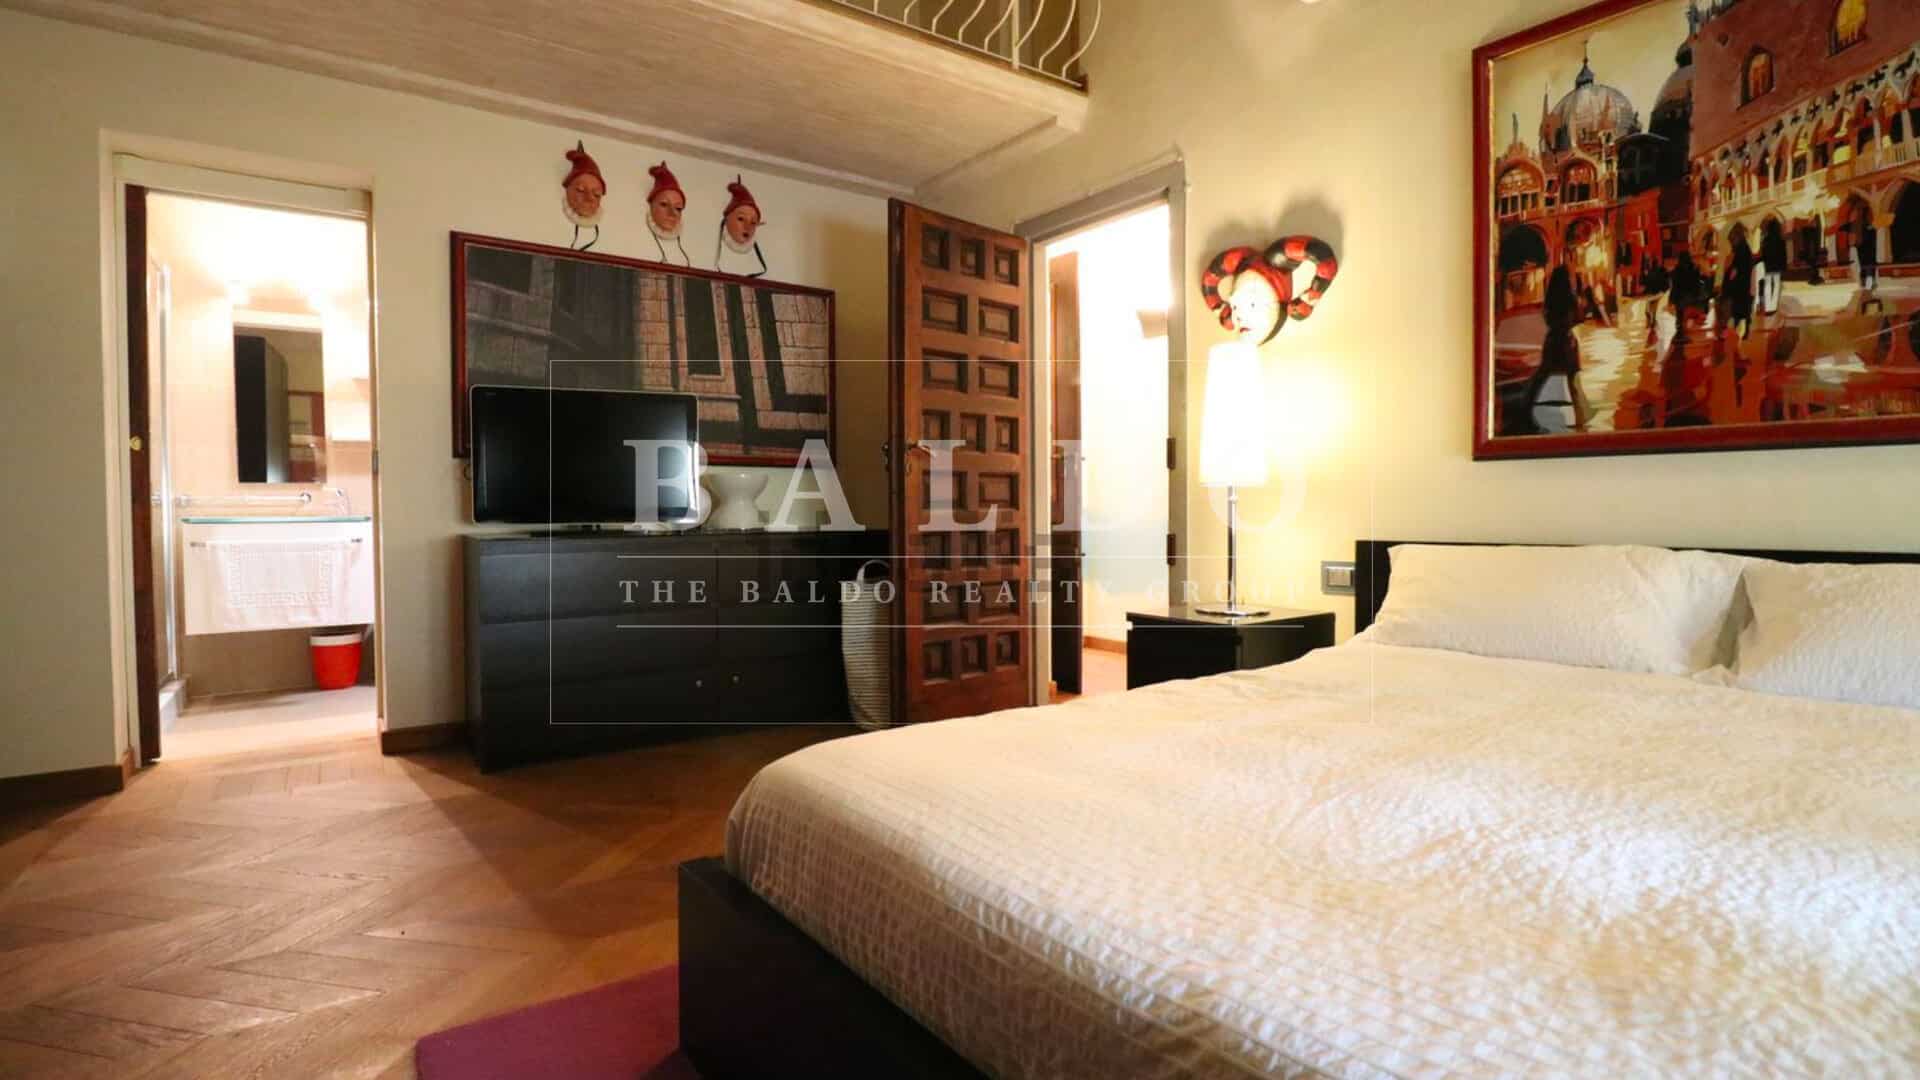 FLORENCE — 250 SQM APARTMENT WITH DUOMO VIEW - Photo 3